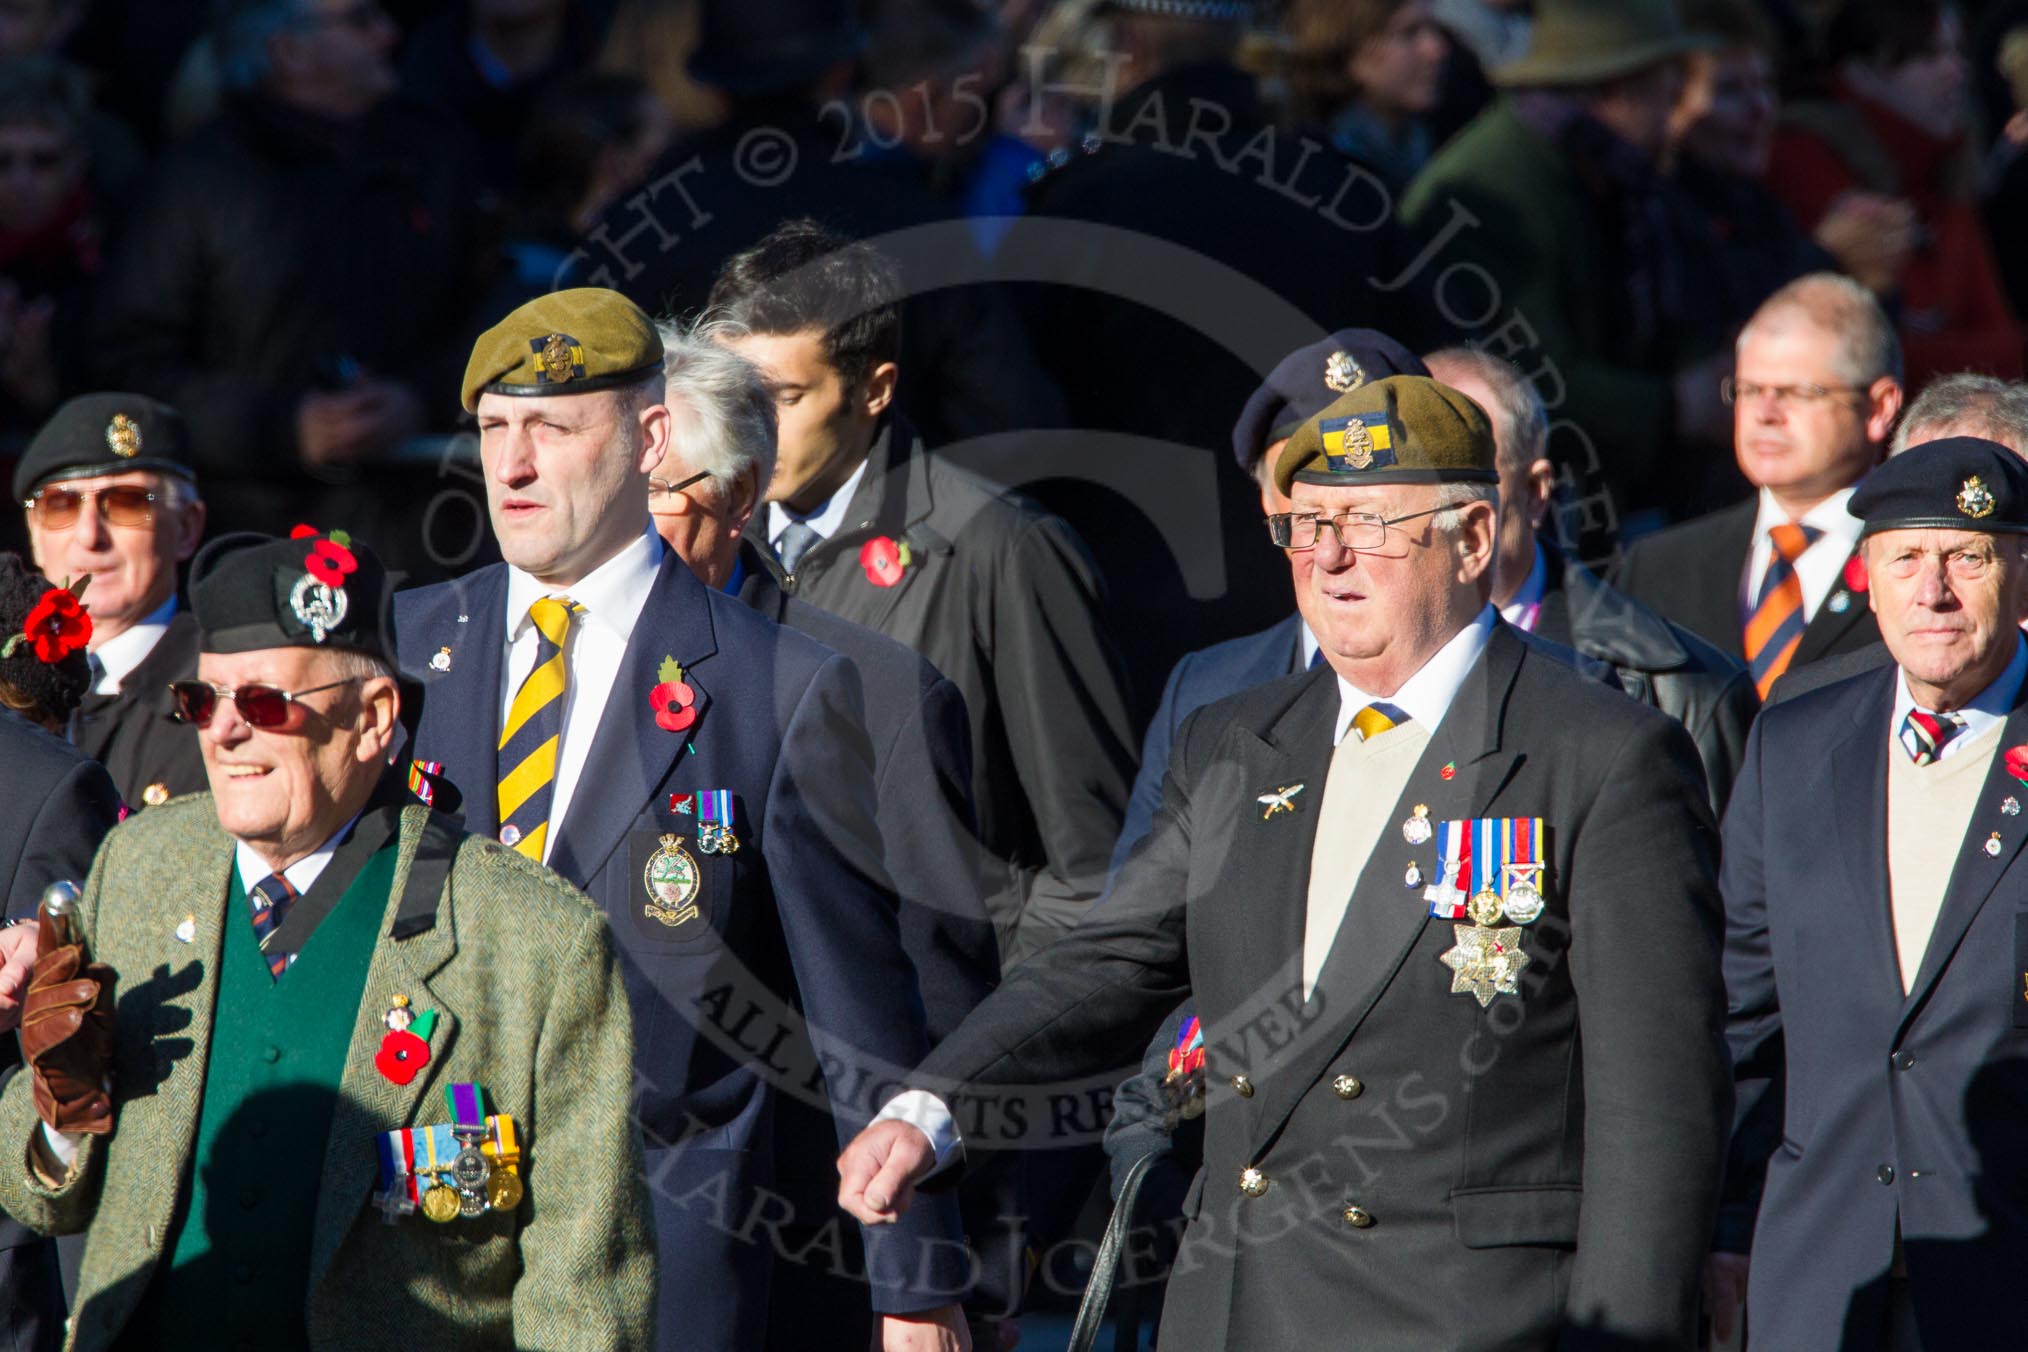 Remembrance Sunday Cenotaph March Past 2013: A30 - Princess of Wales's Royal Regiment..
Press stand opposite the Foreign Office building, Whitehall, London SW1,
London,
Greater London,
United Kingdom,
on 10 November 2013 at 11:58, image #1277